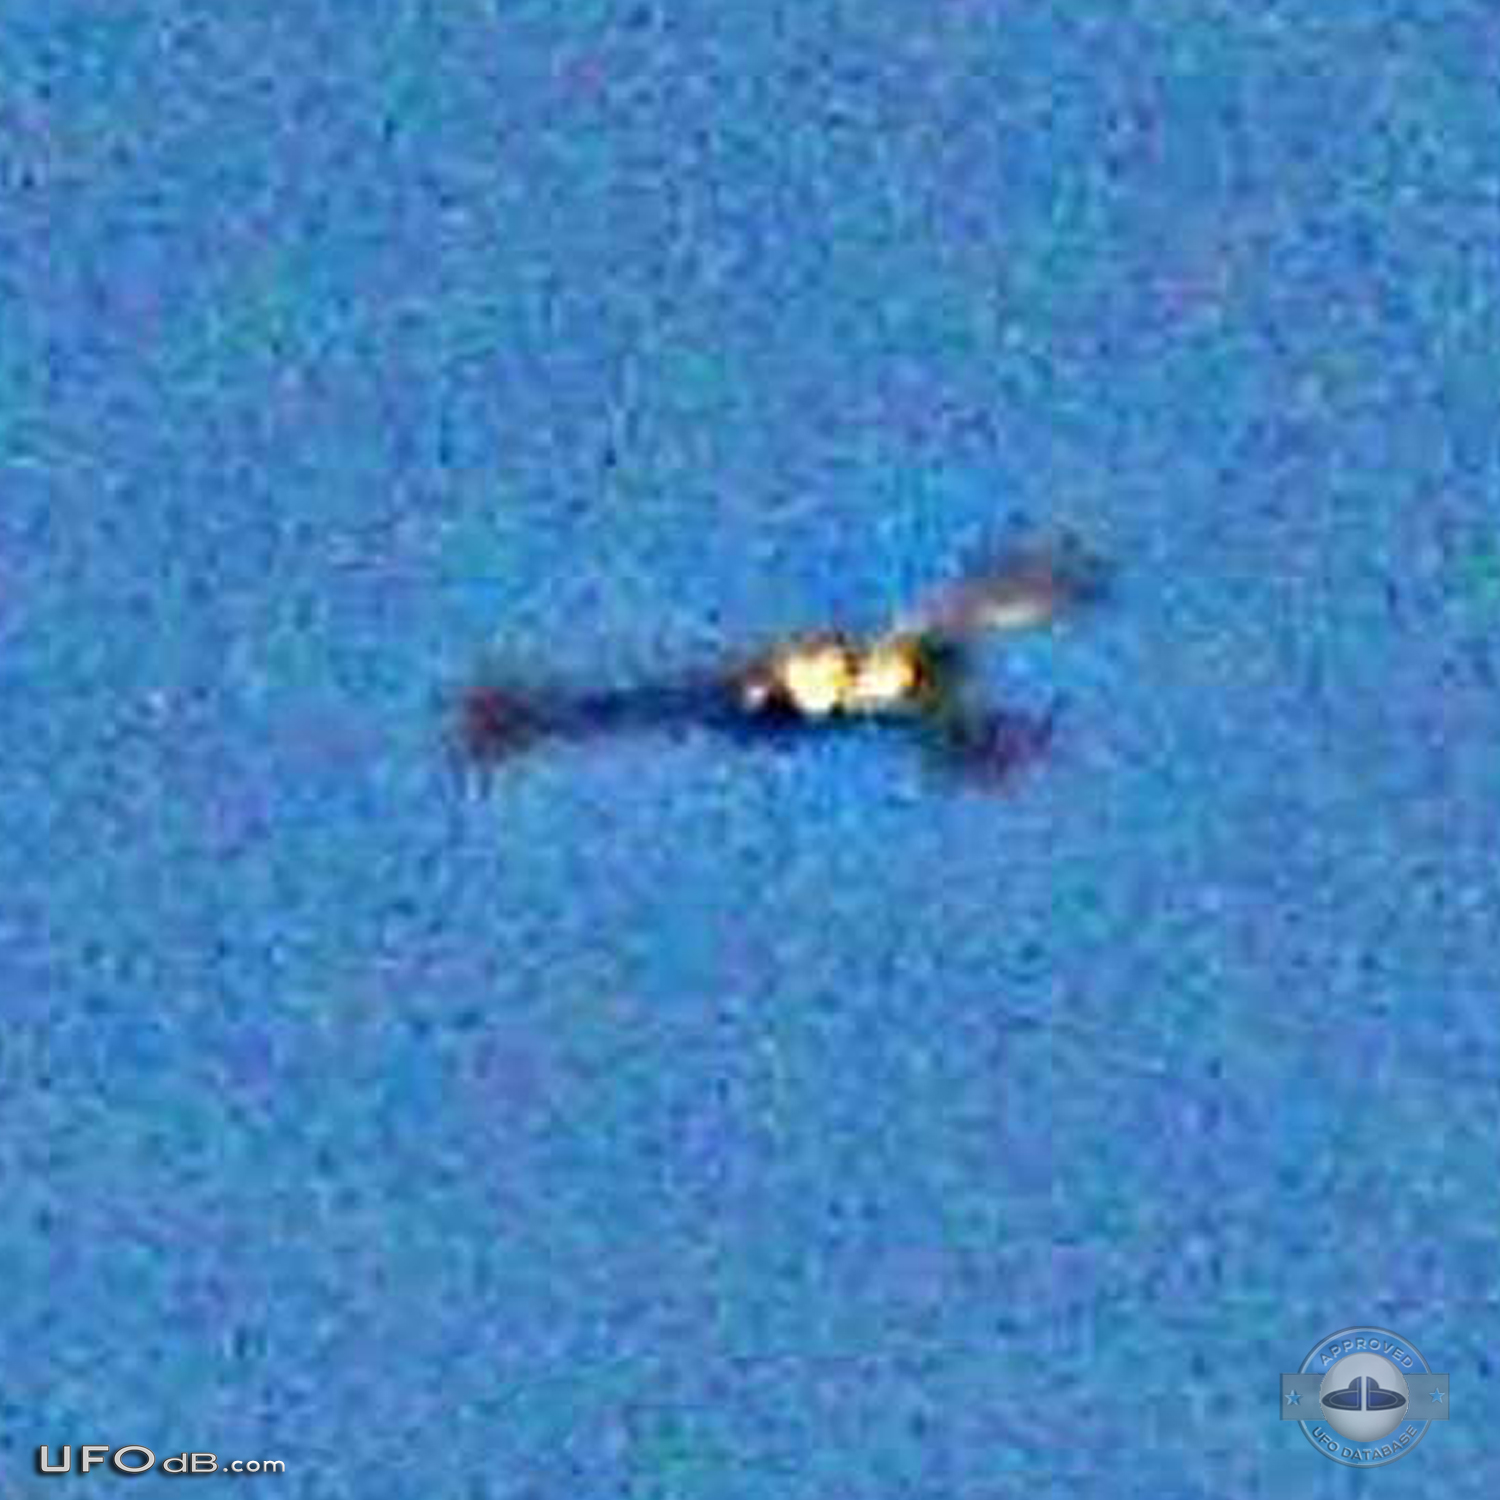 UFO similar to Star Trek Klingon ship seen over Canary Island in 2011 UFO Picture #483-6